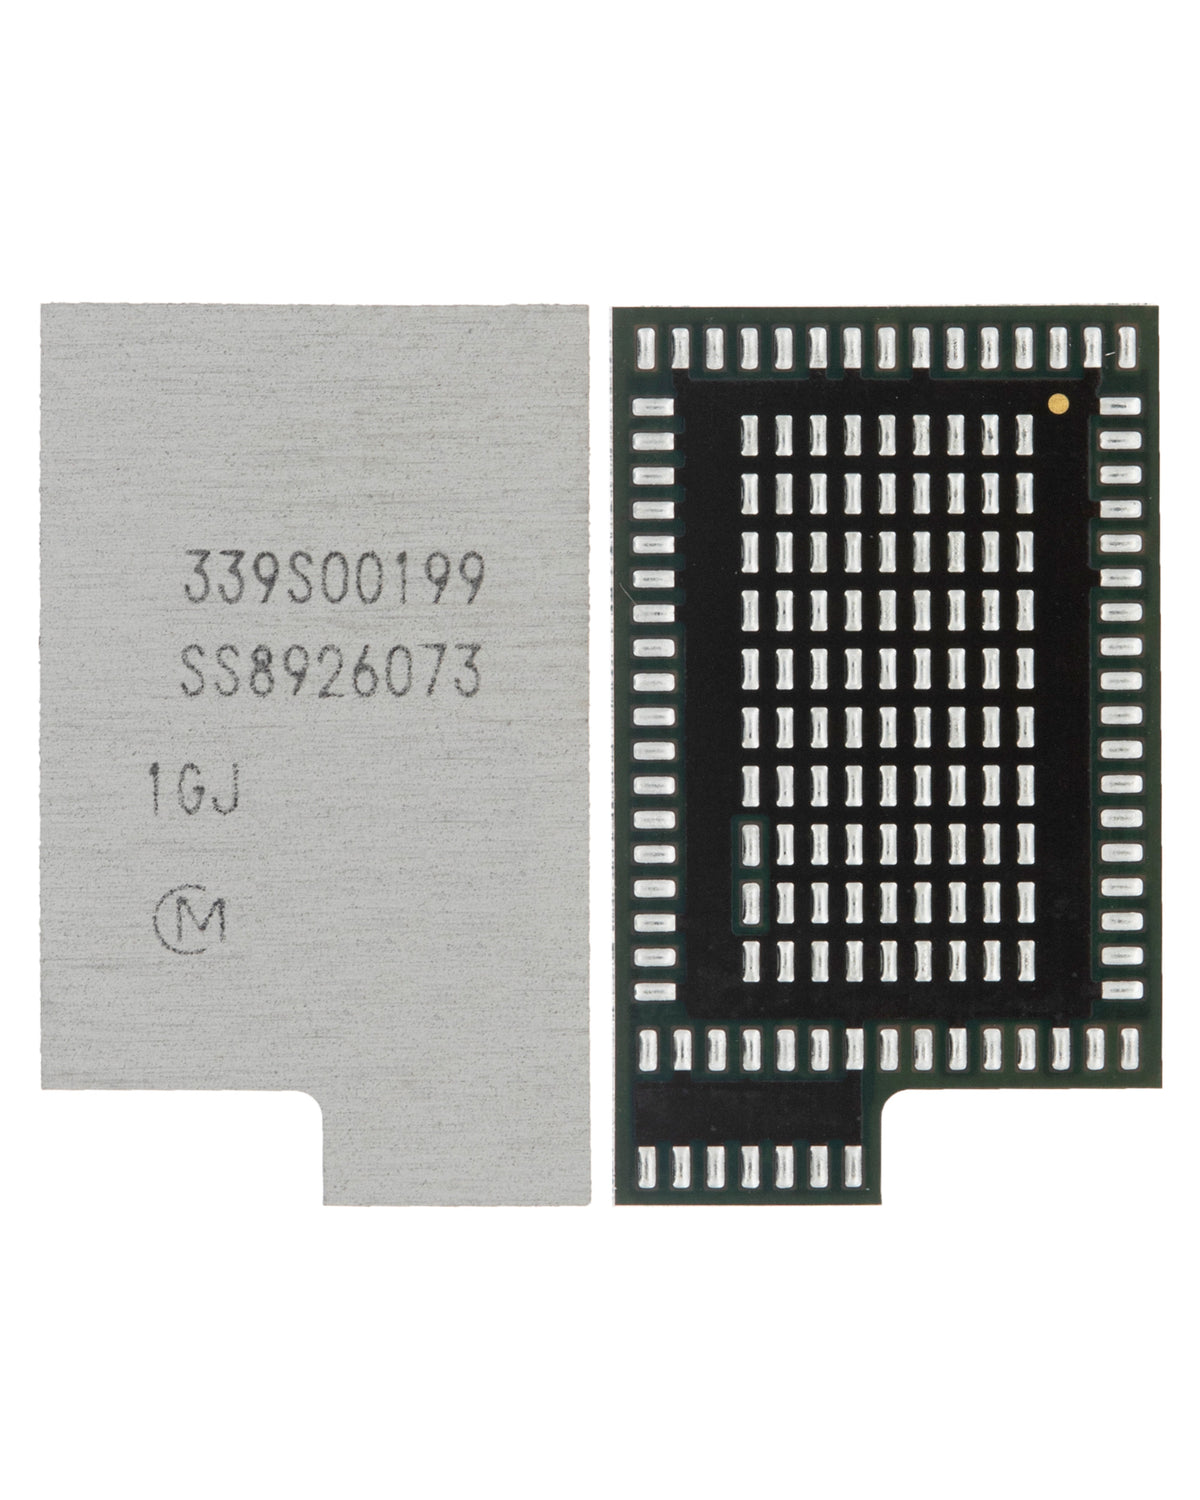 WIFI MODULE IC CHIP COMPATIBLE WITH IPHONE 7 / 7 PLUS (WLAN_RF: 339S00199: 163 PINS)